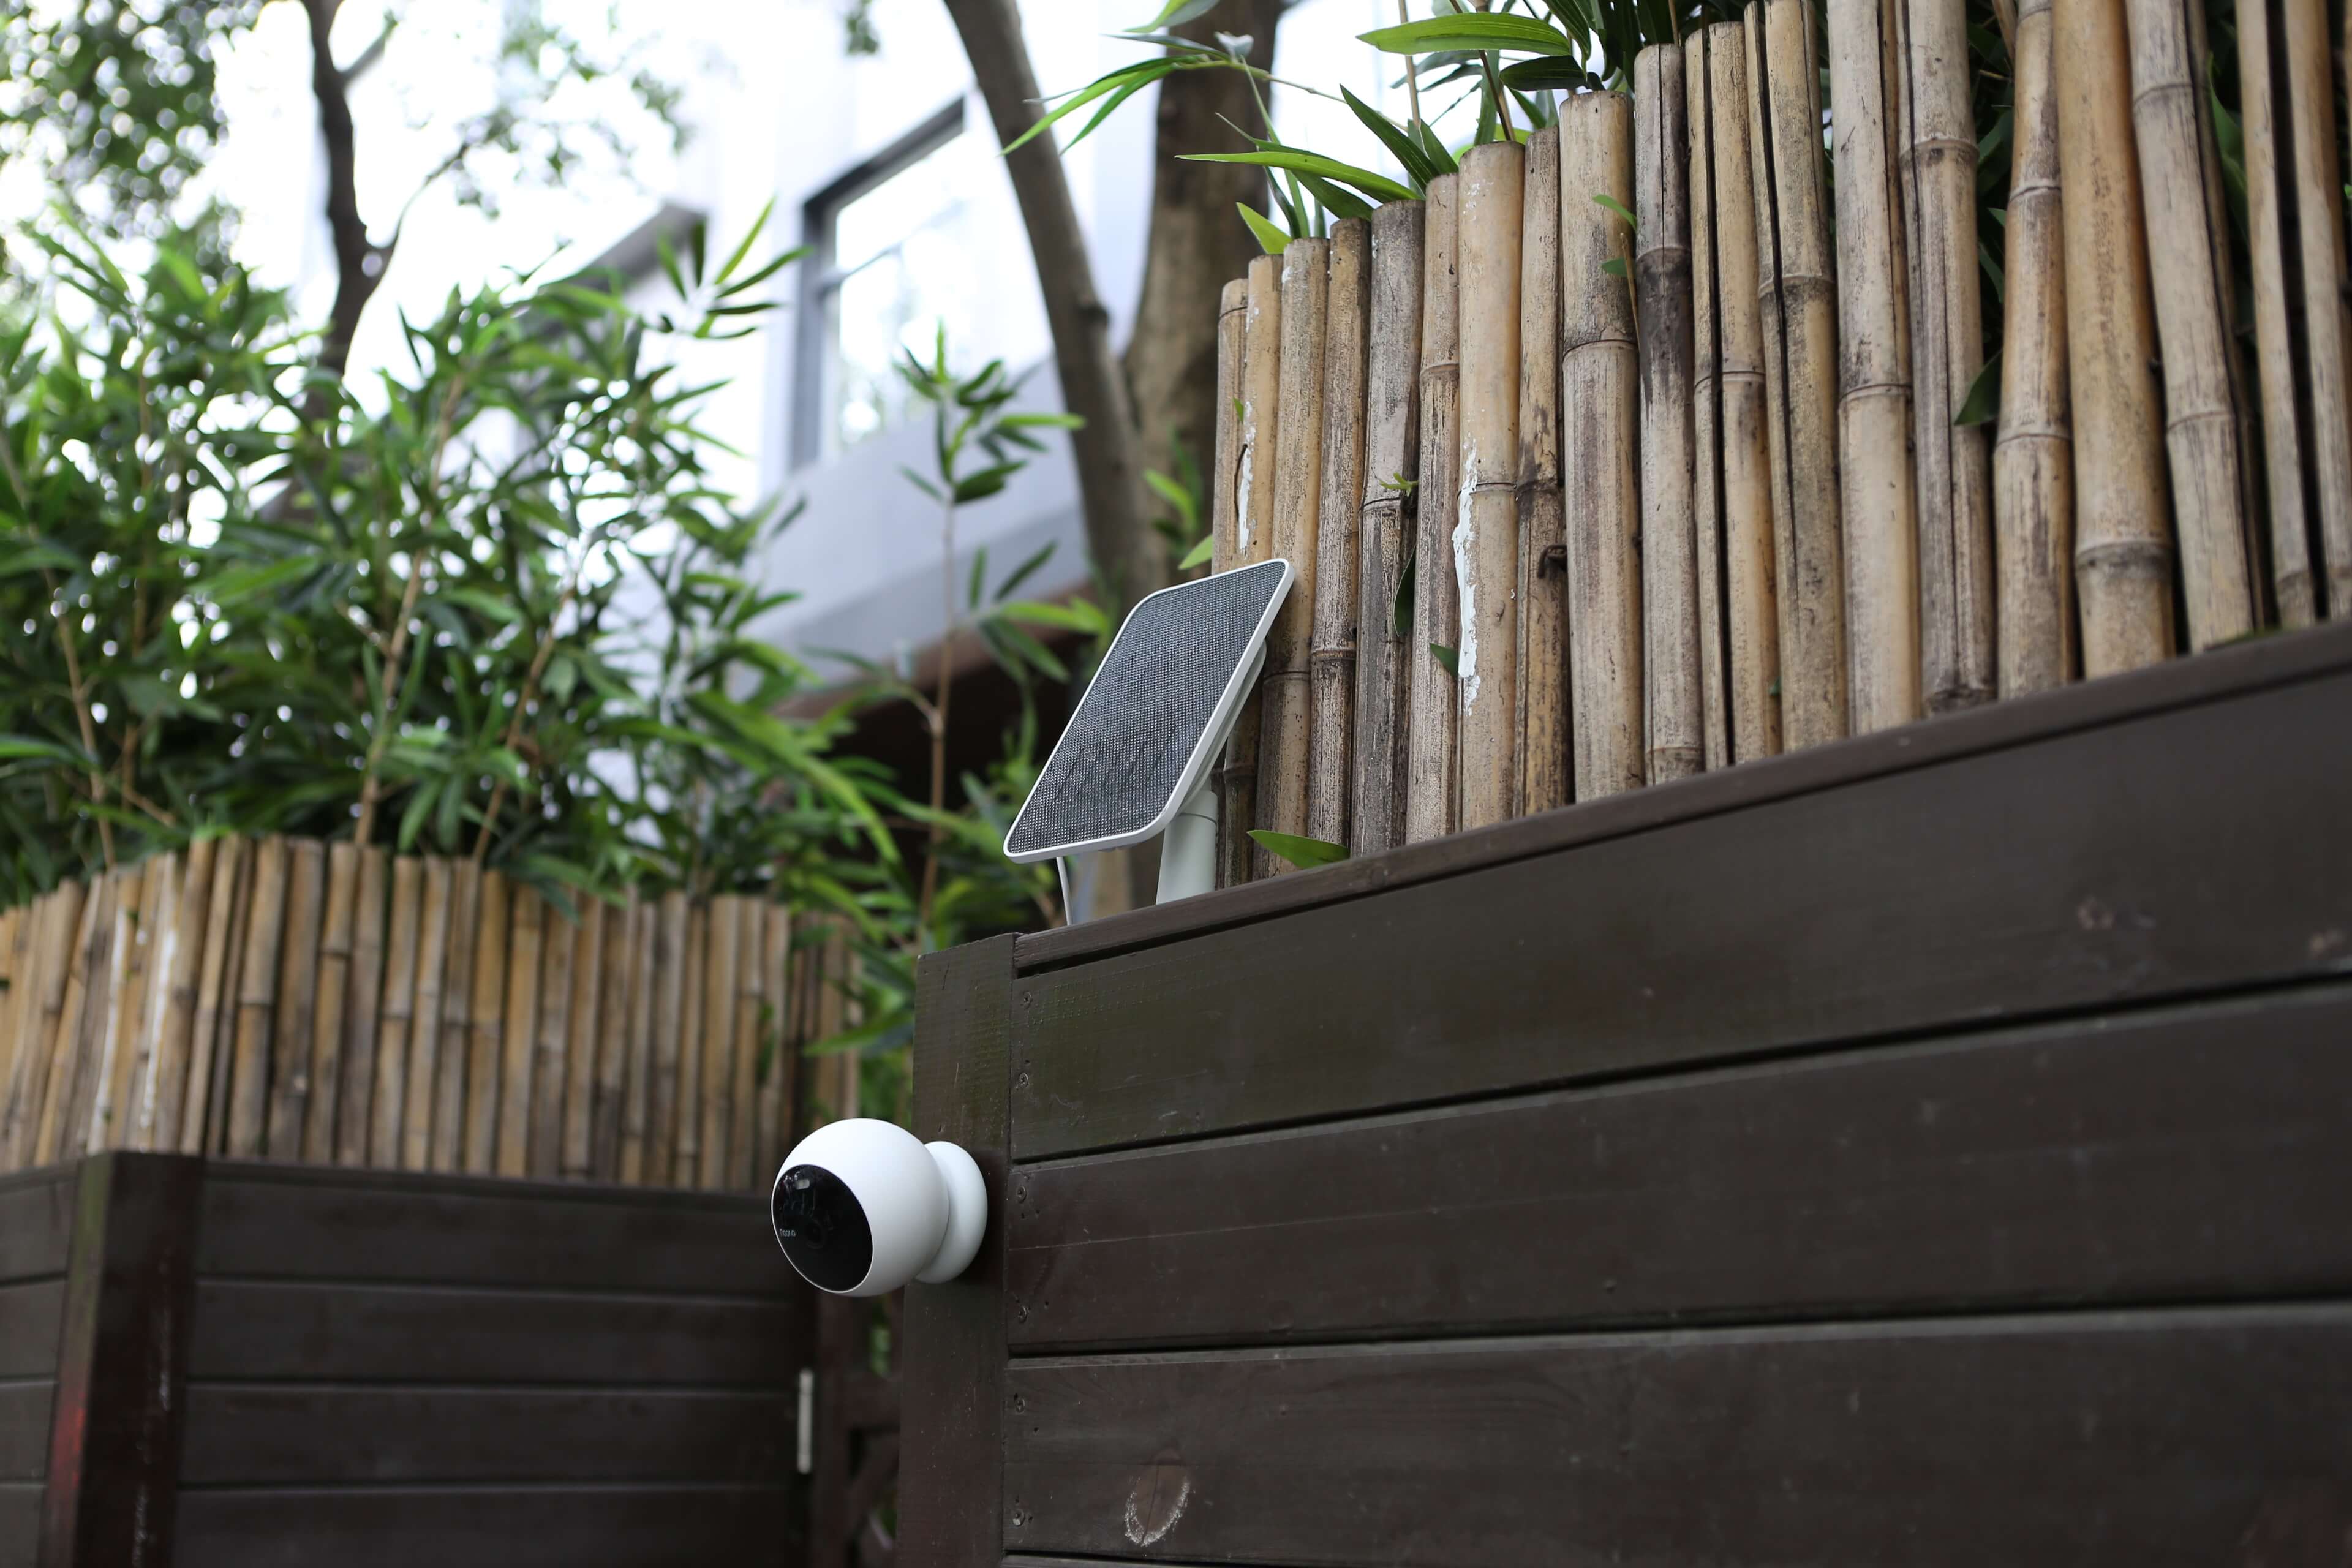 hd security camera with activity zone detection